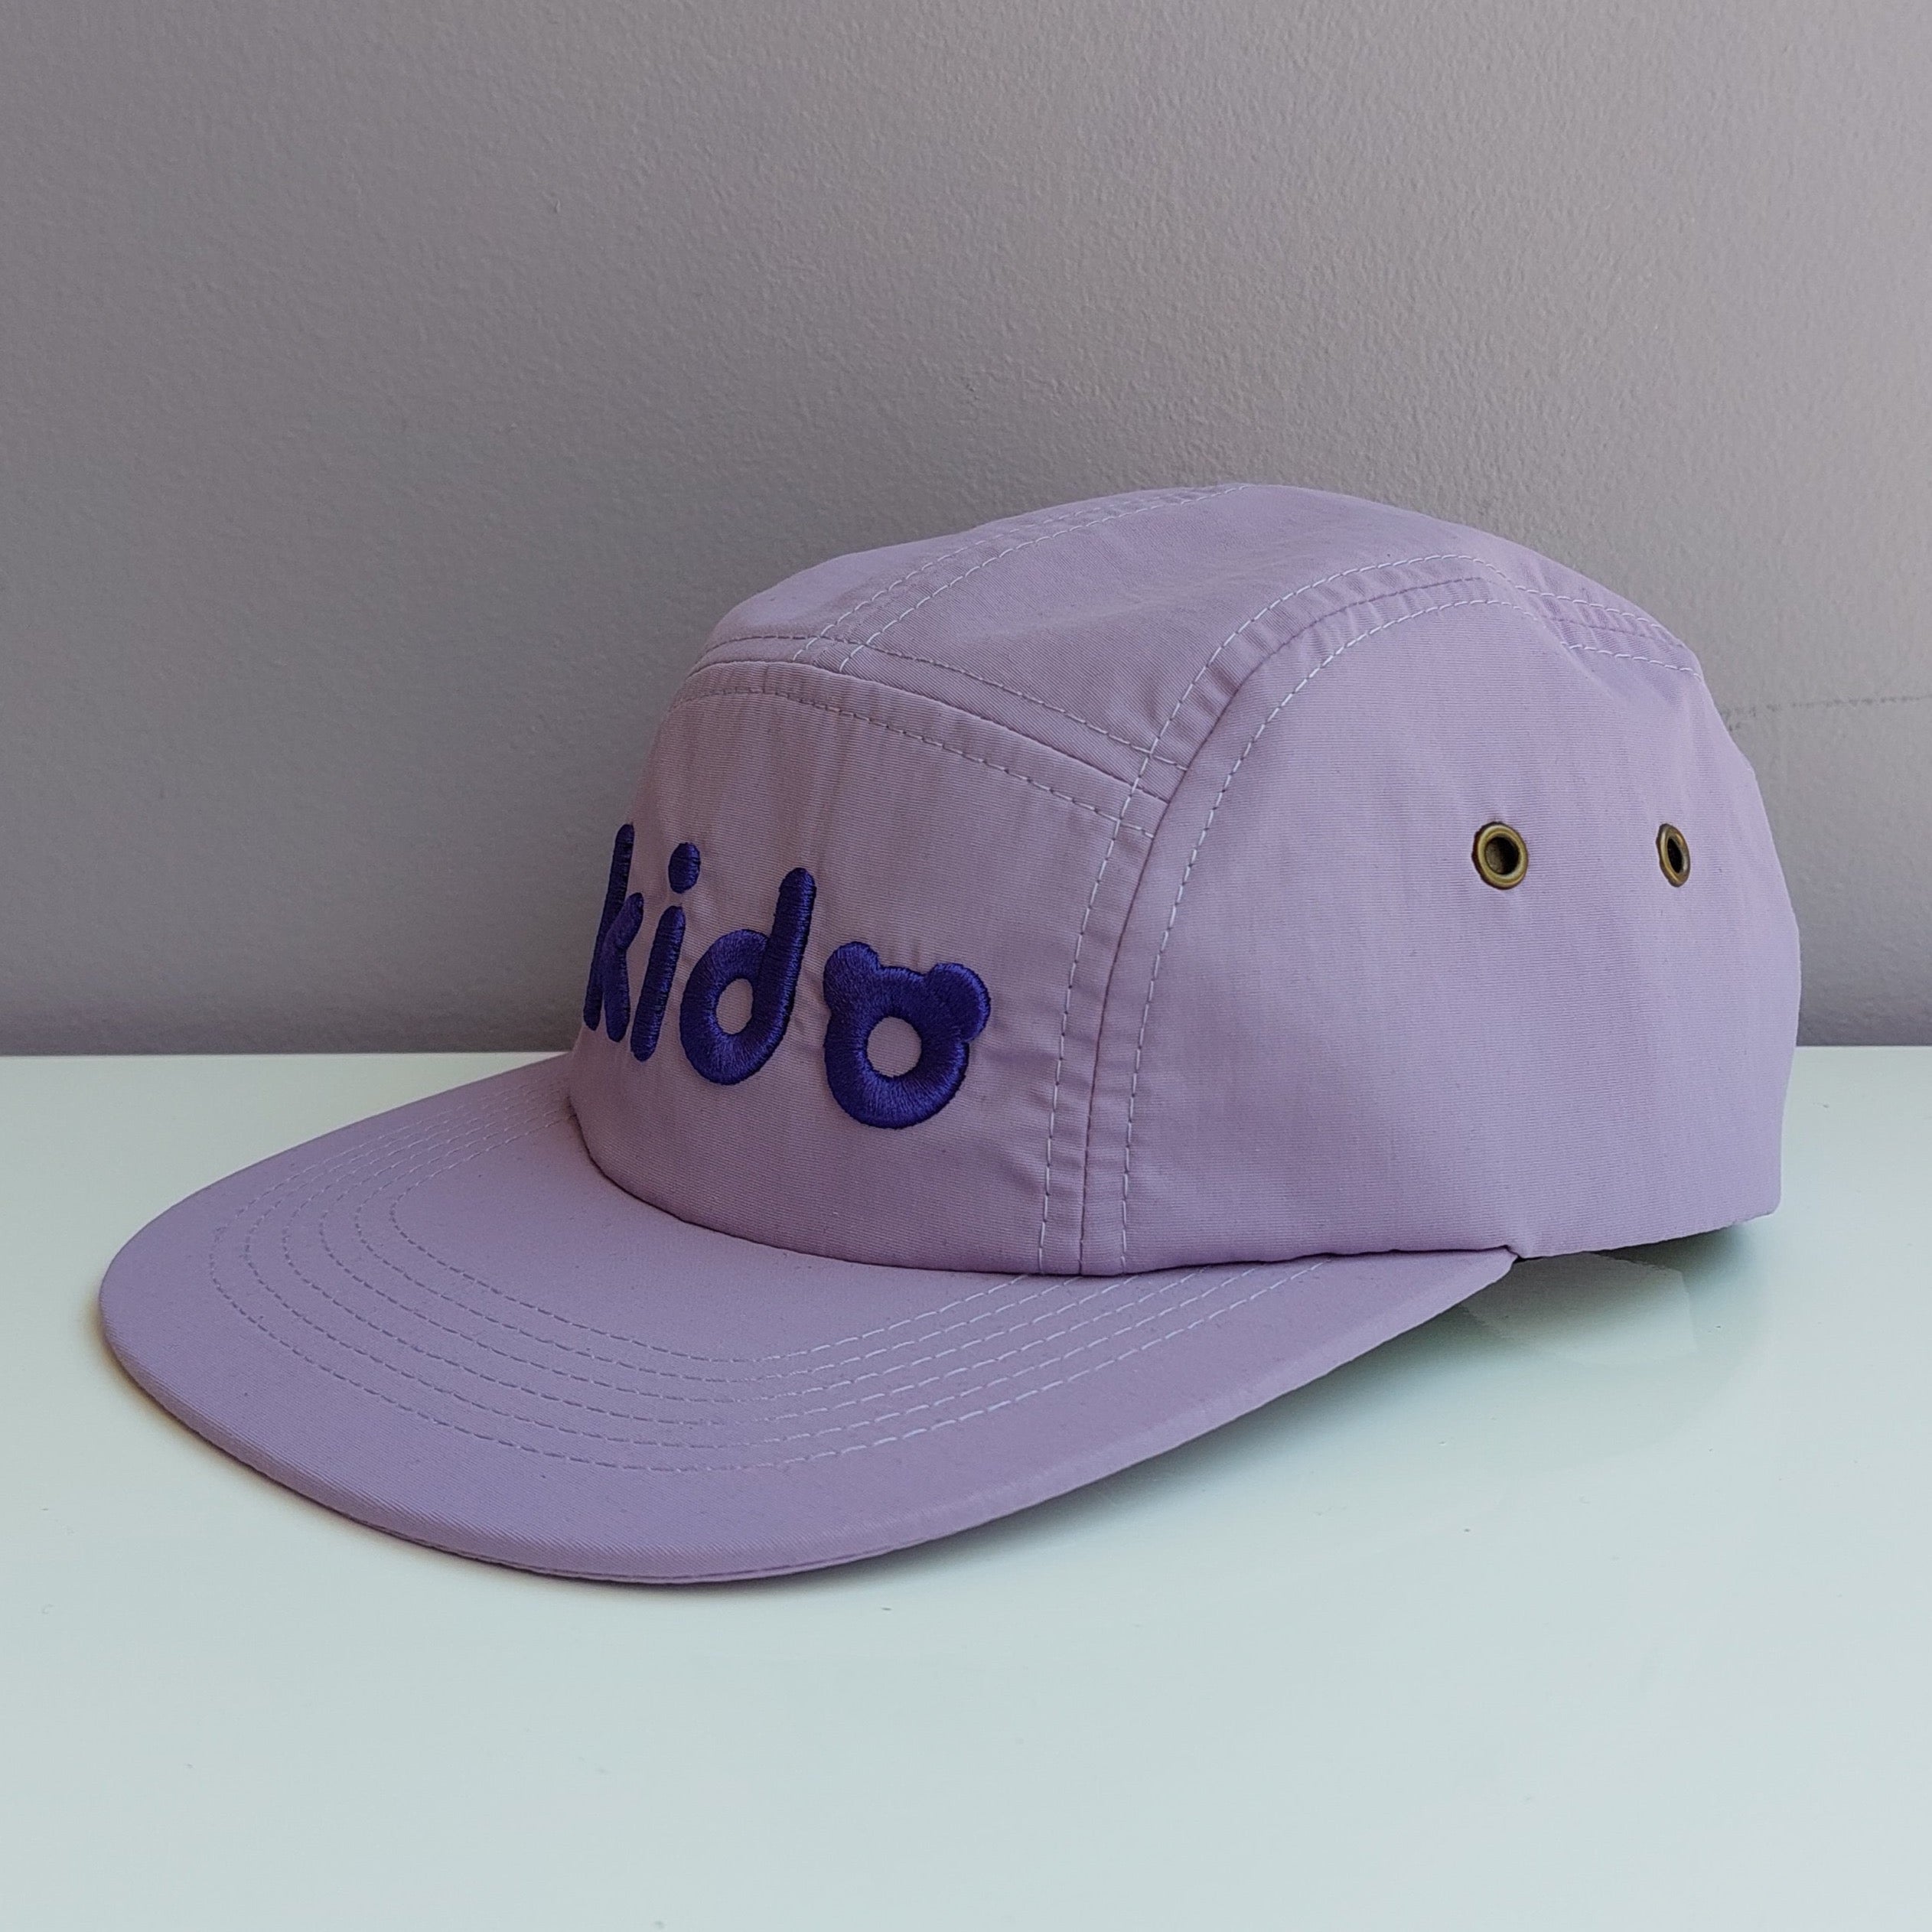 A light purple 5 panel cap turned at a 45 degree angle sits on a white surface with a light purple background. The Kido logo is embroidered across the front in darker purple thread.